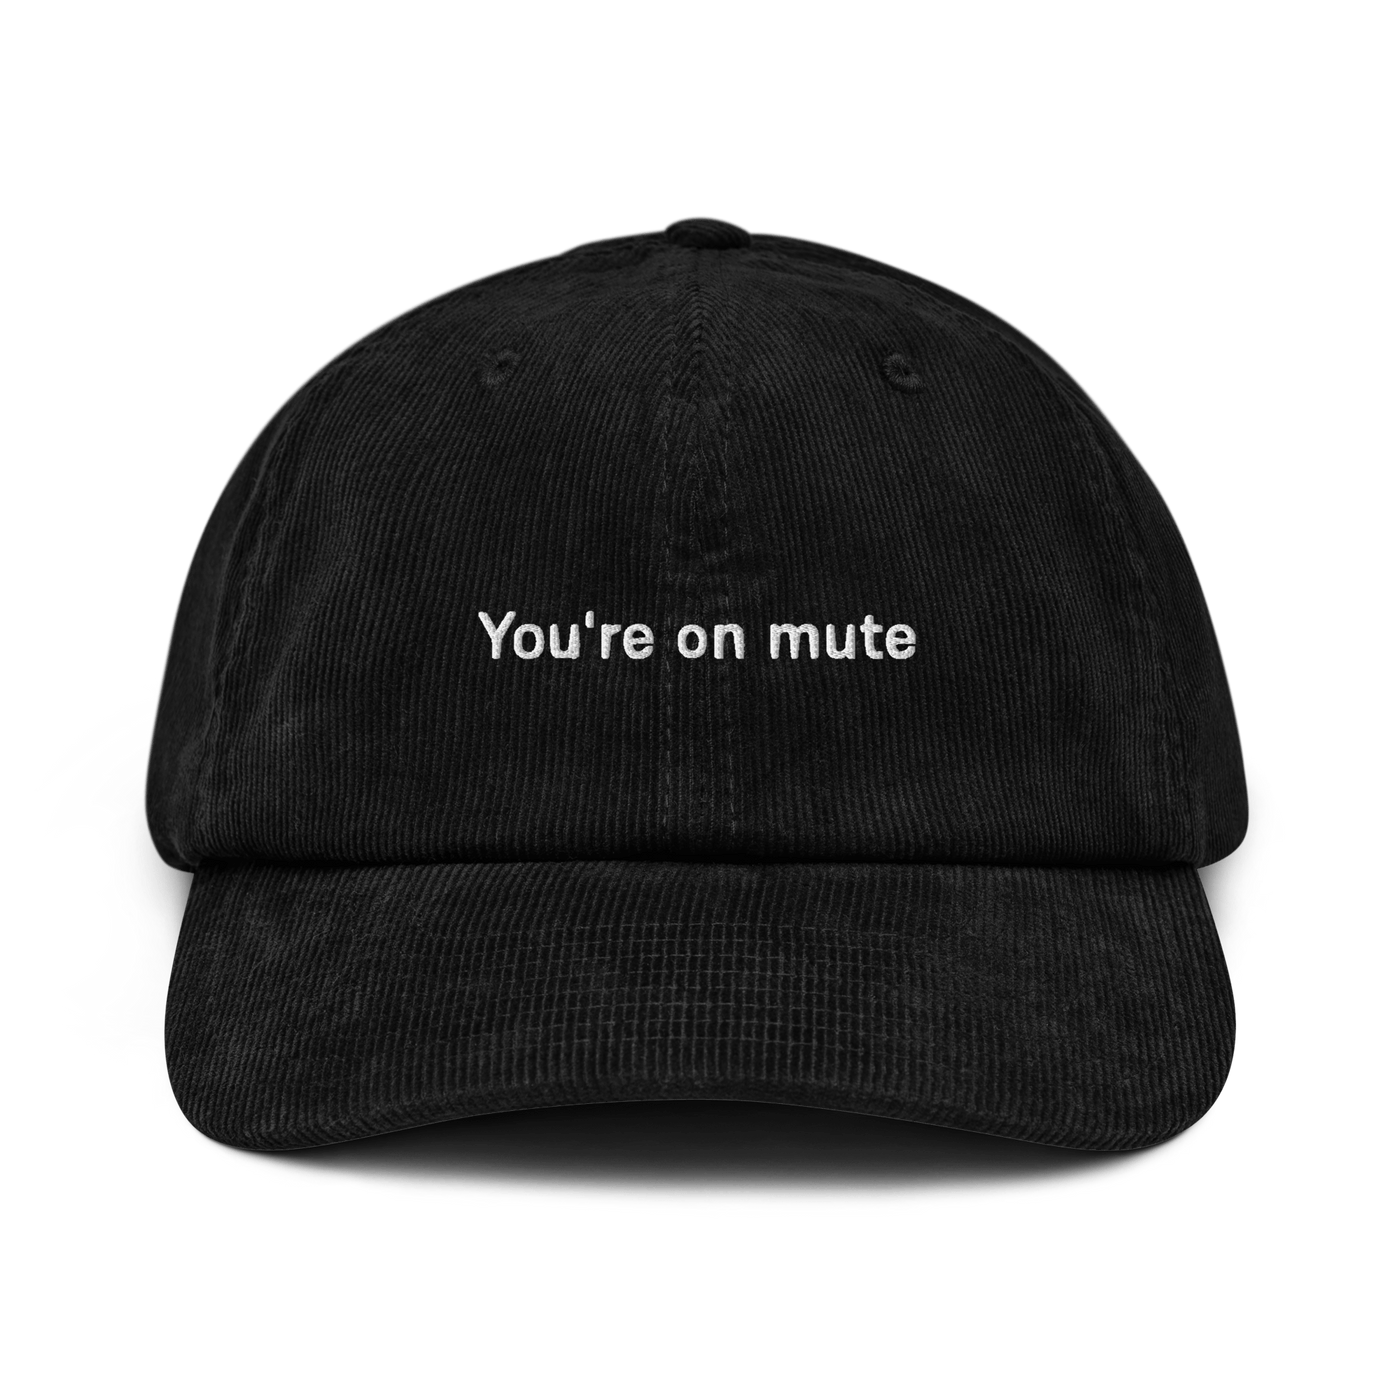 "You're on mute" Corduroy hat - Black - - Just Another Cap Store